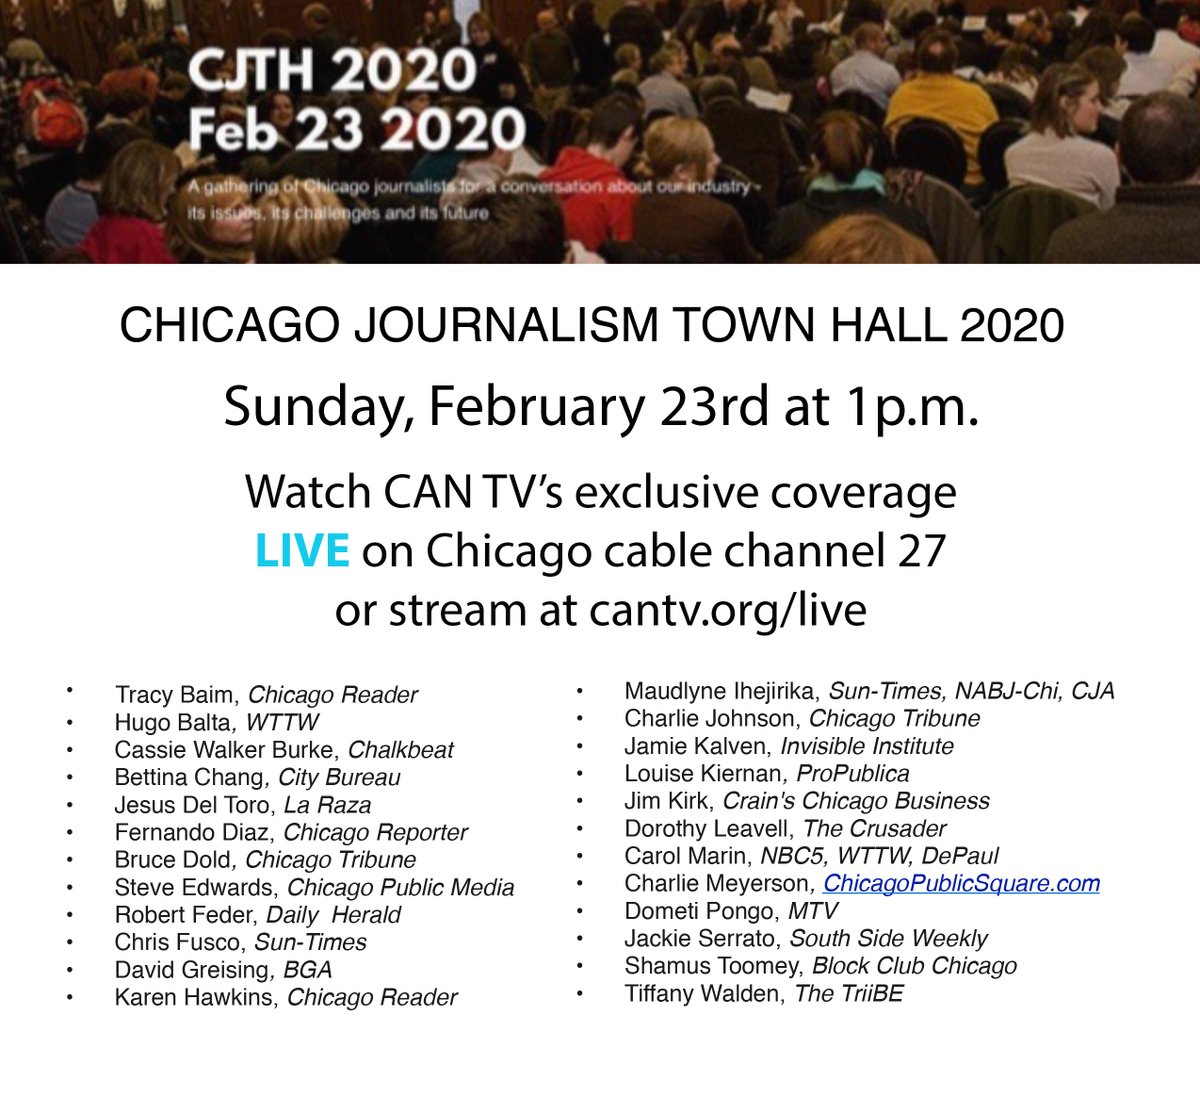 Can Tv On Sun Feb 23rd At 1 P M Watch The Chicago Journalism Town Hall Live On Chicago Cable Channel 27 Or At T Co Mpmnbvspw5 Cjtw Chicagojournalism Kendavis27 Heathercherone Ctguild